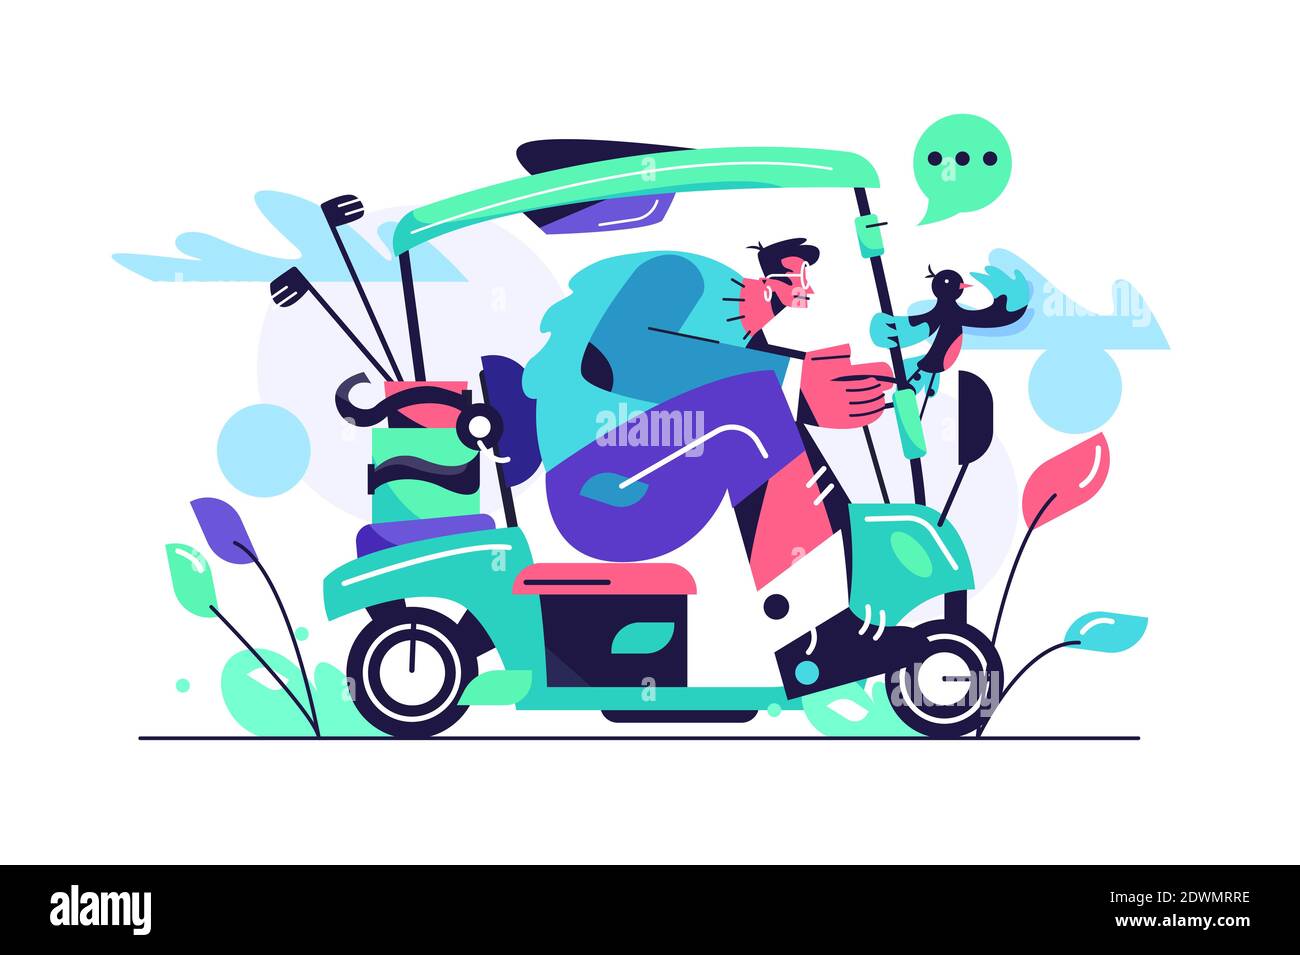 A guy with glasses and shorts rides a golf car Stock Vector